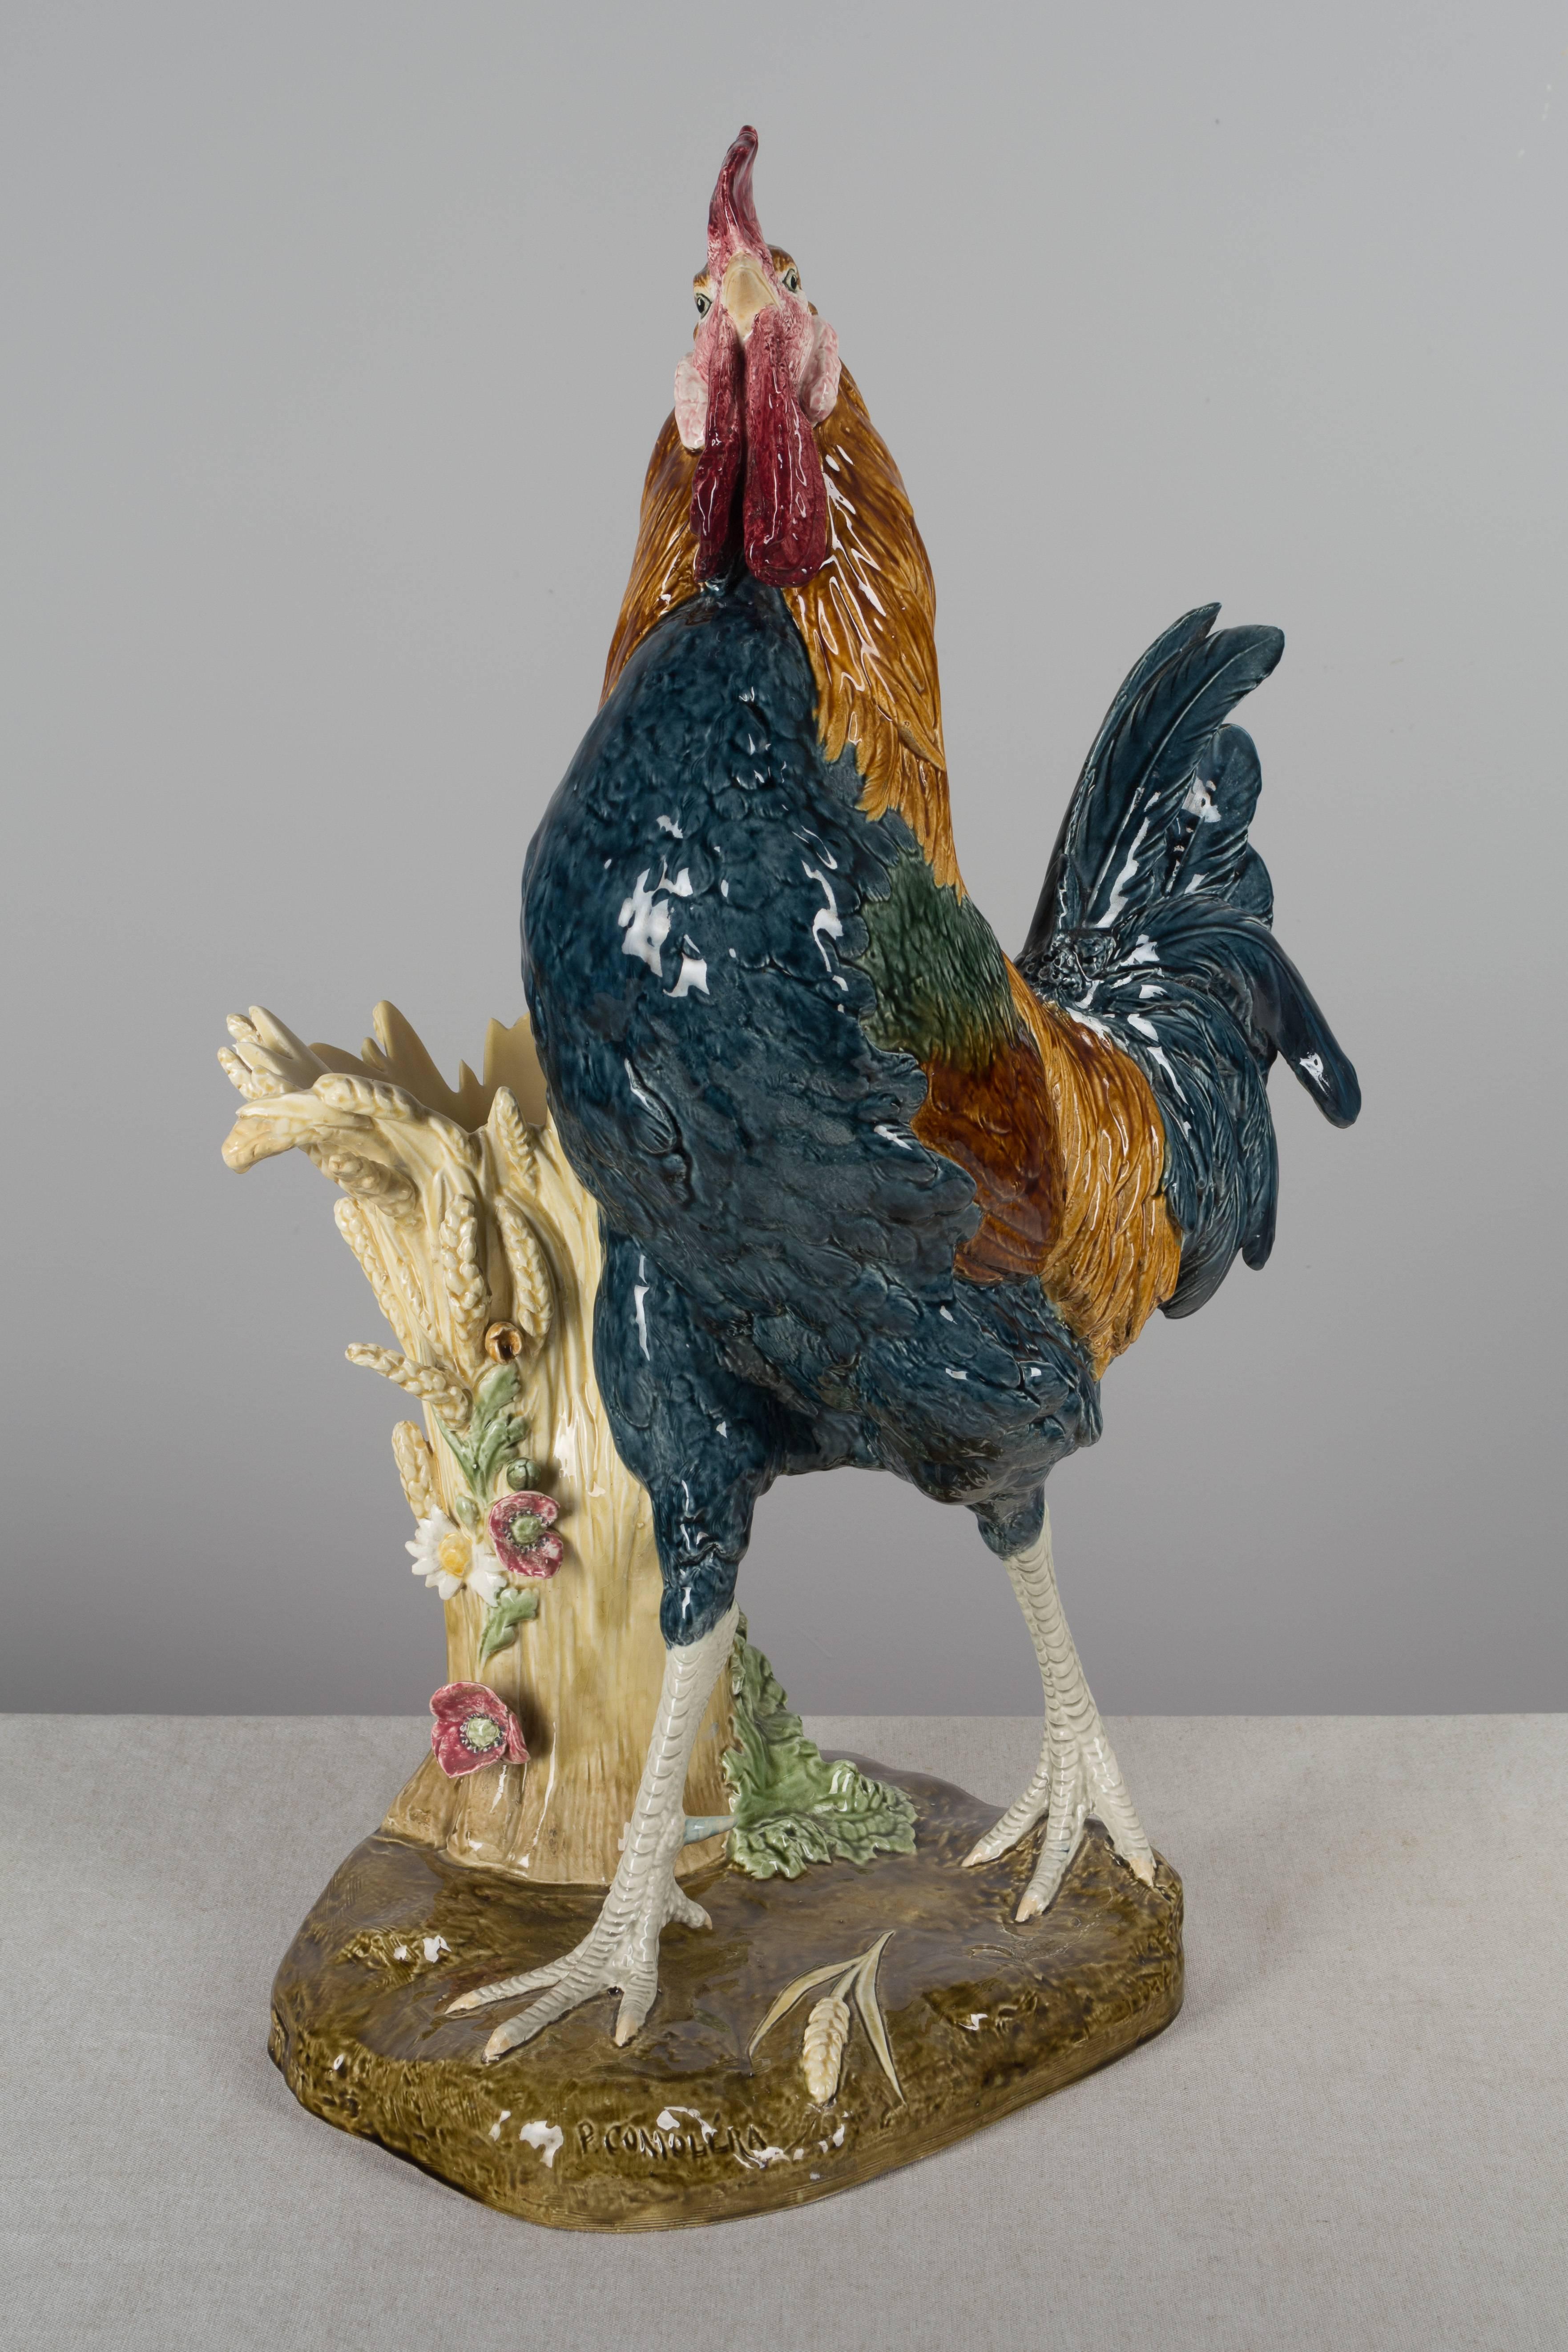 A 19th century French Majolica rooster by Paul Comolera for Choisy le Roi. A magnificent large-scale sculpture of exceptional artistry. Beautiful color and fine detail work in the bird's feathers and the sheaf of wheat that forms the vase. In